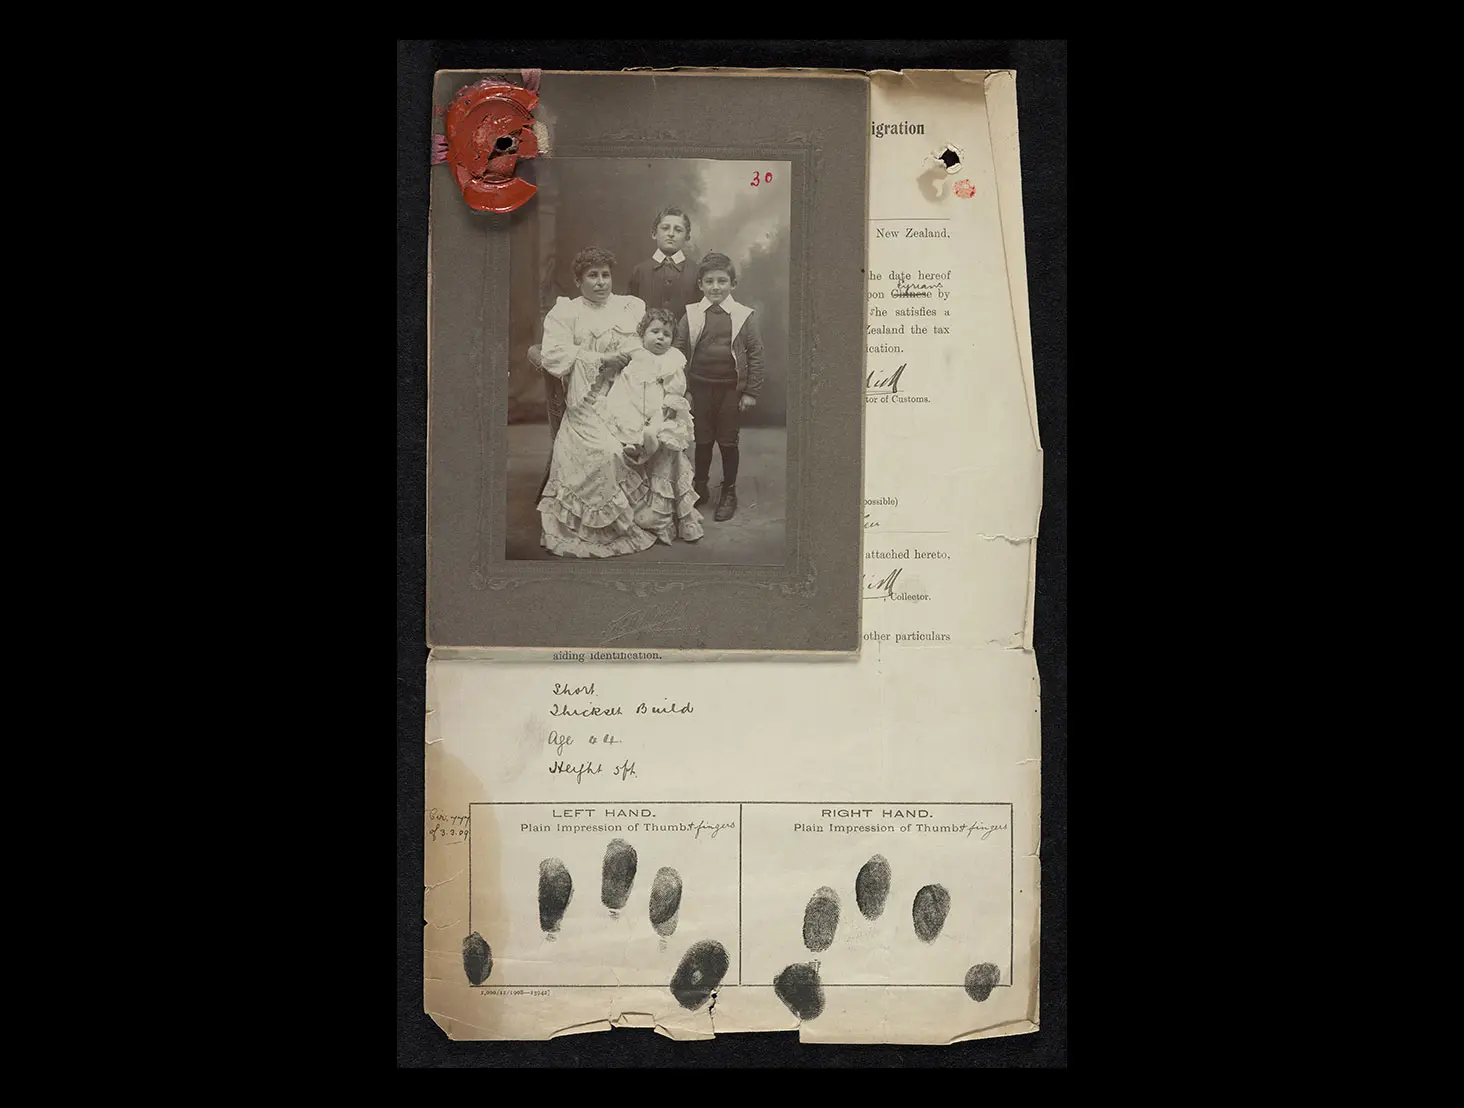 Certificate of registration for a Syrian family (Lily Khowi and her 3 children) entering Aotearoa NZ. It shows a black and white photo of them on top of a sheet with left and right-hand fingerprints for identification.